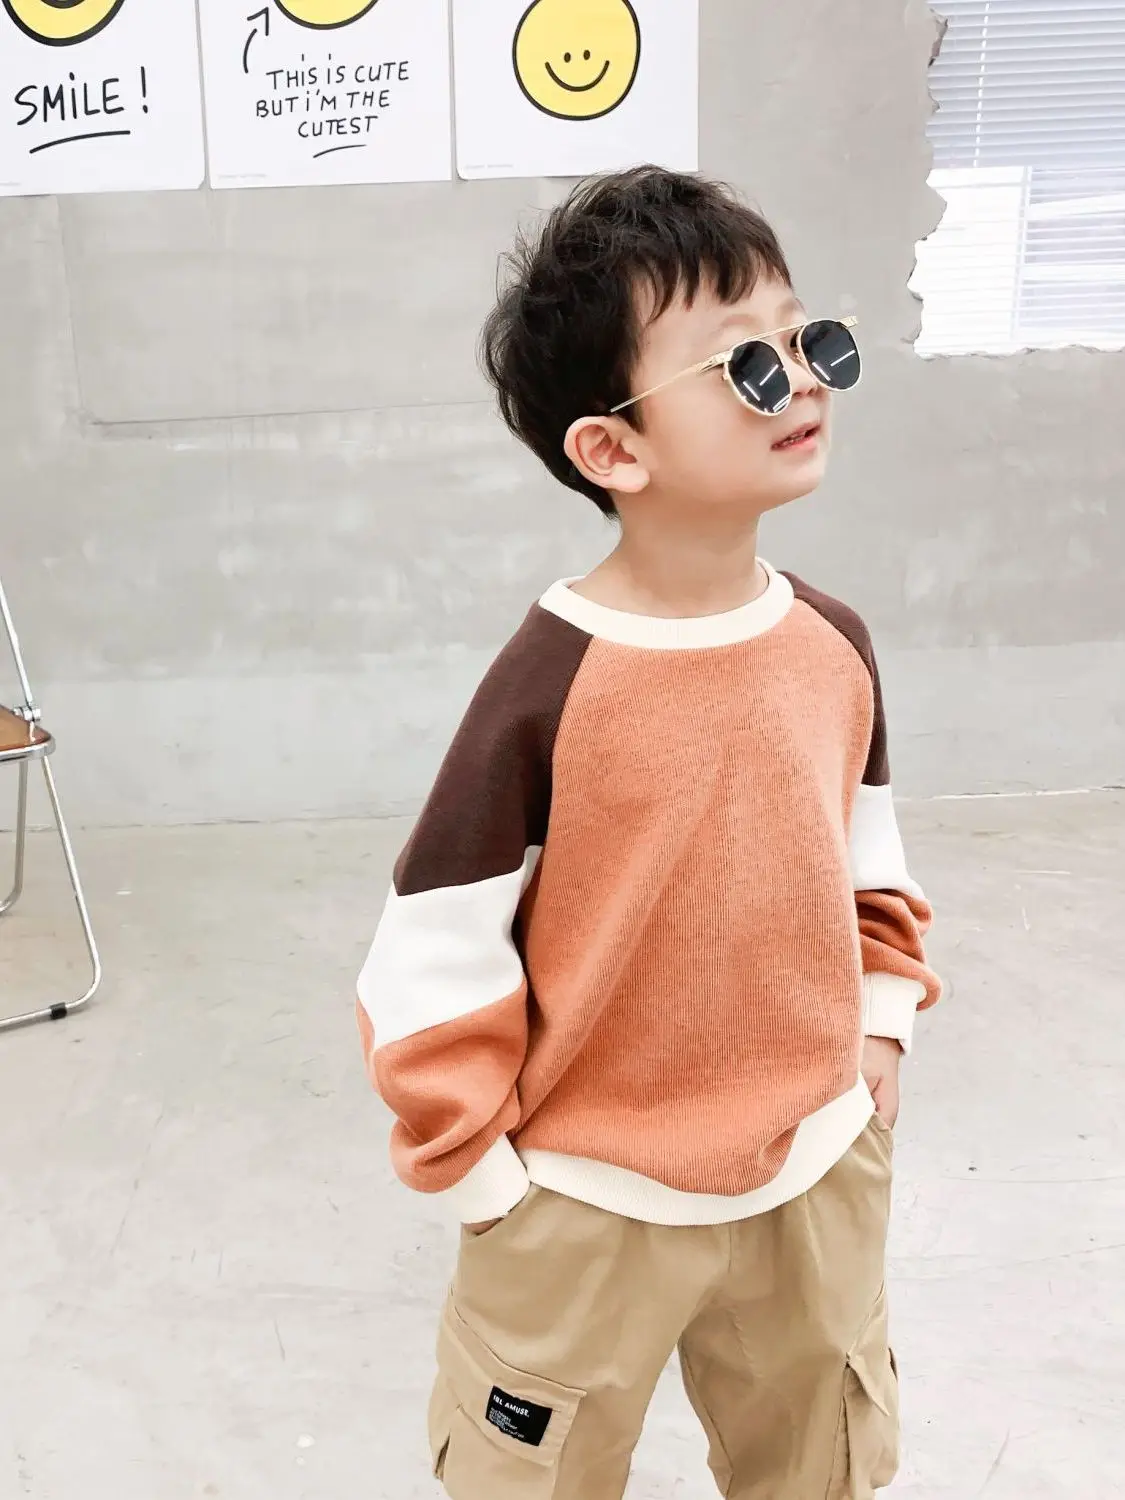 New Spring and Autumn Children's Wear Boys' Sweatshirt Round Neck Undercoat Children's Color Contrast Clothing Japanese Style enlarge